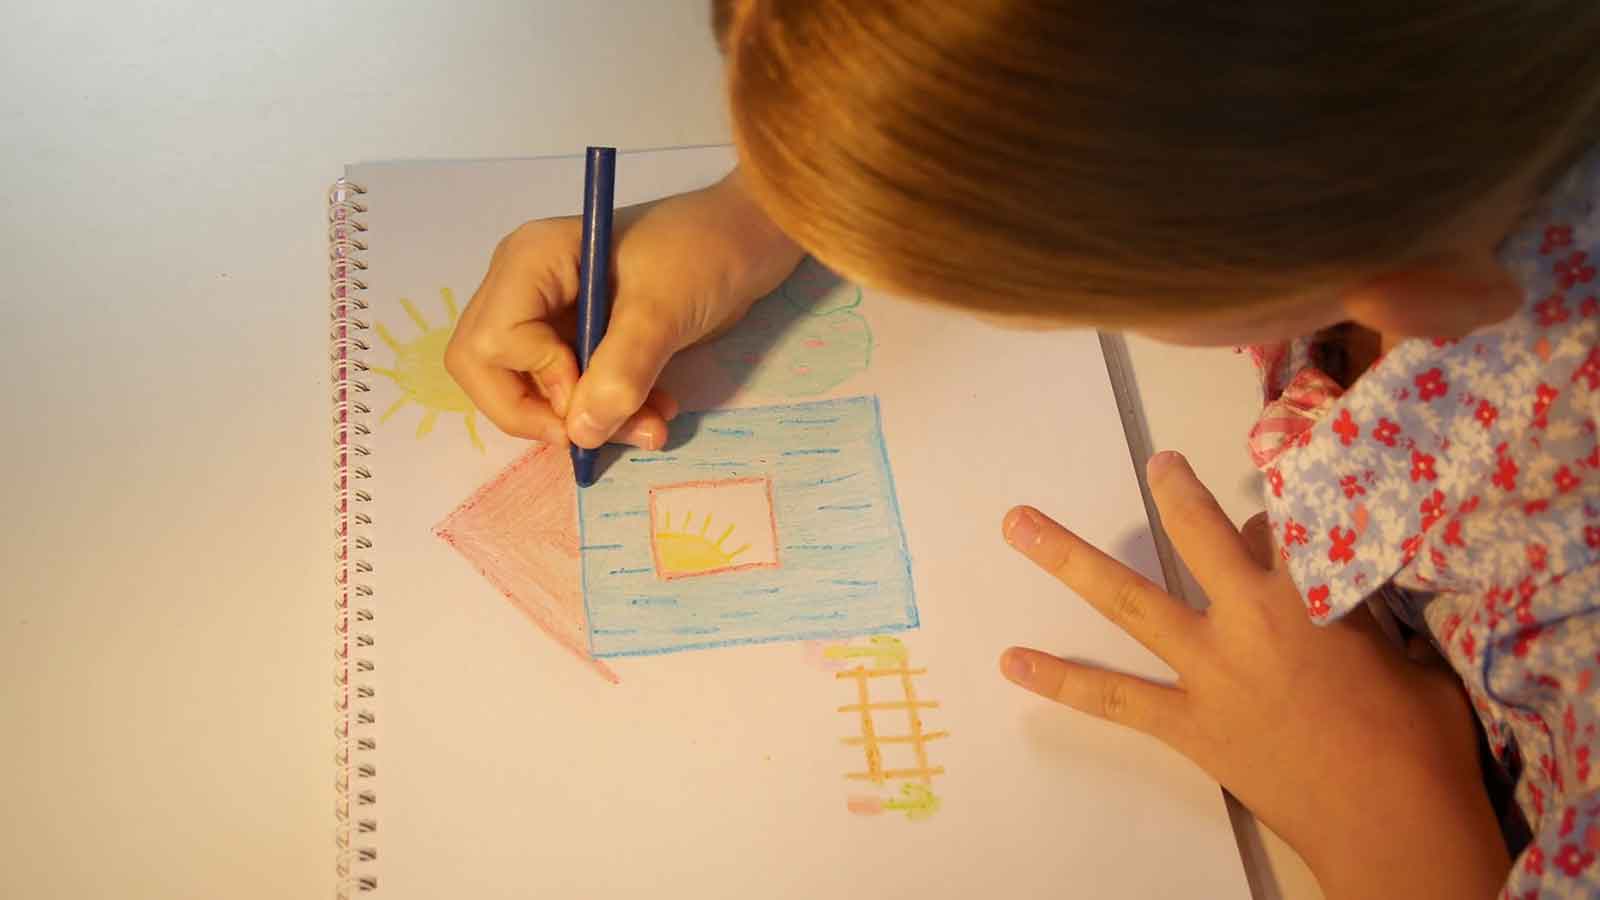 A girl using crayons to color a draw a house.